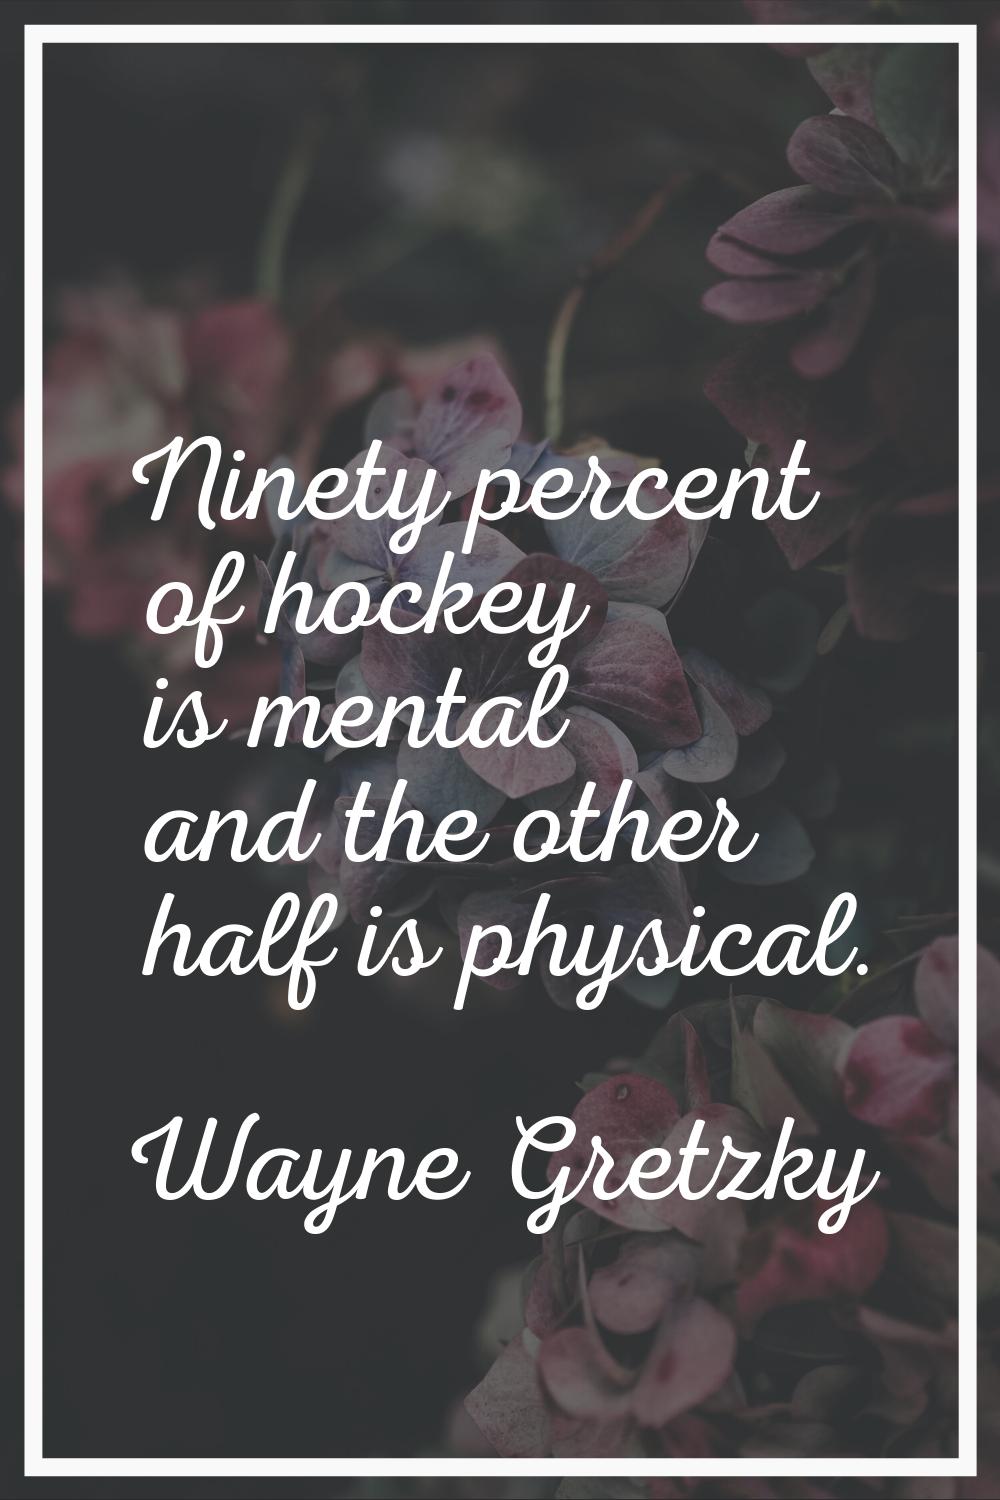 Ninety percent of hockey is mental and the other half is physical.